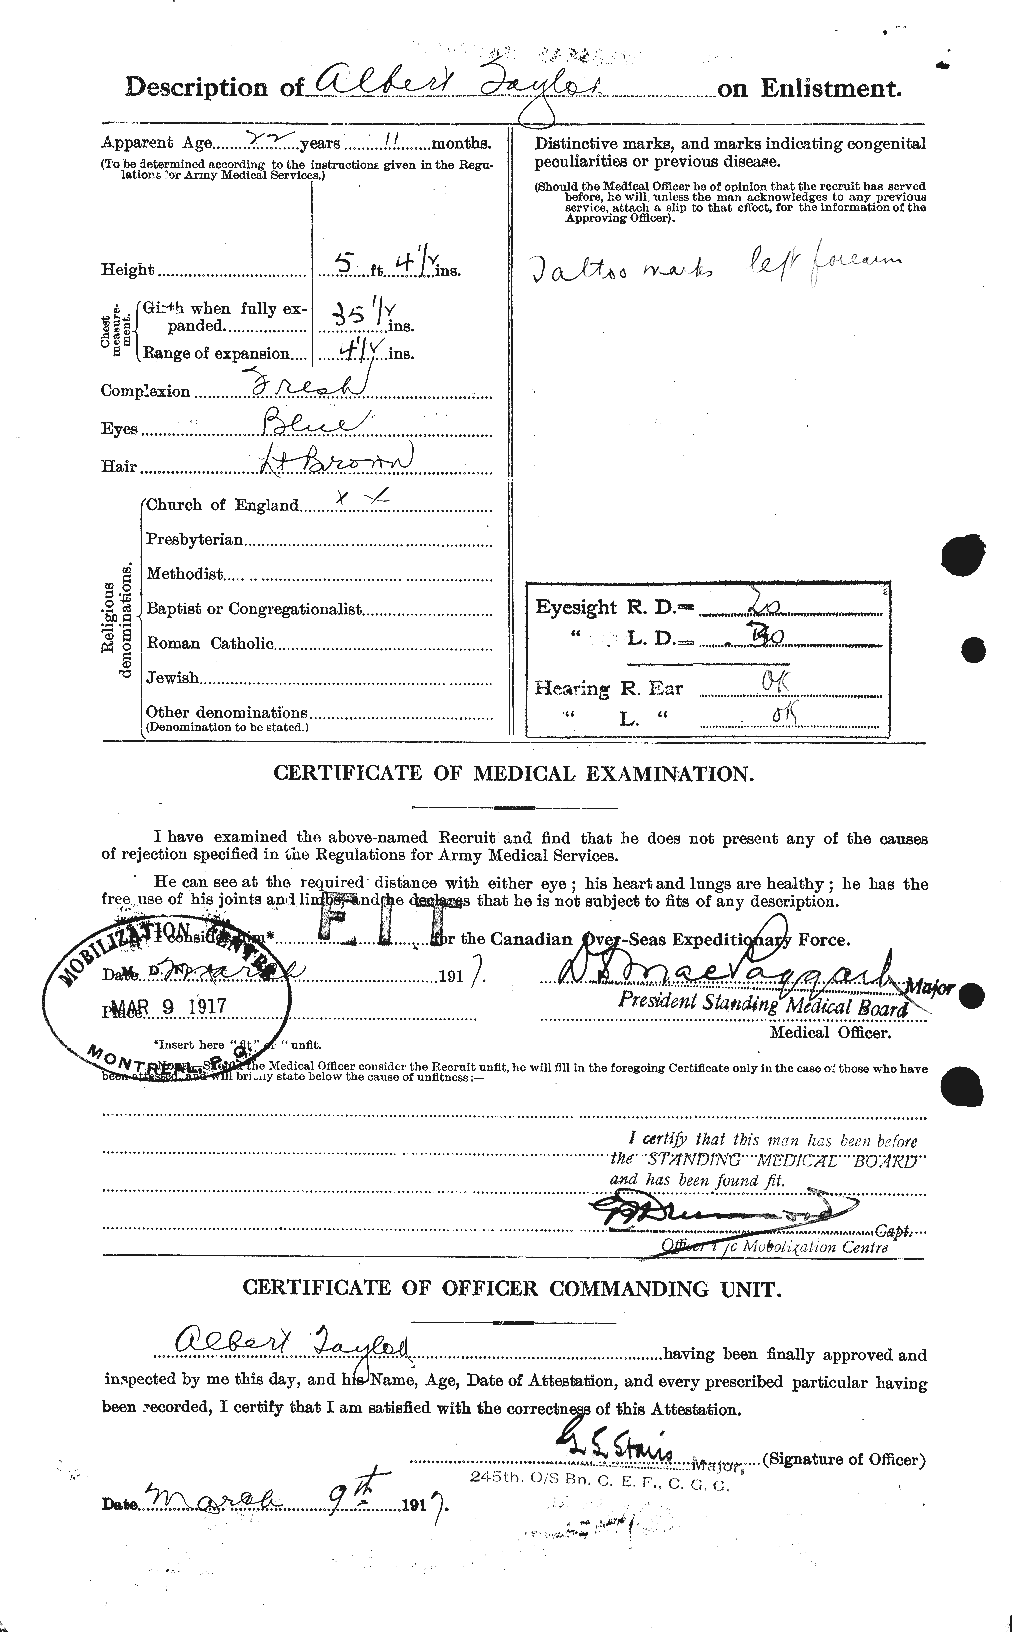 Personnel Records of the First World War - CEF 626081b